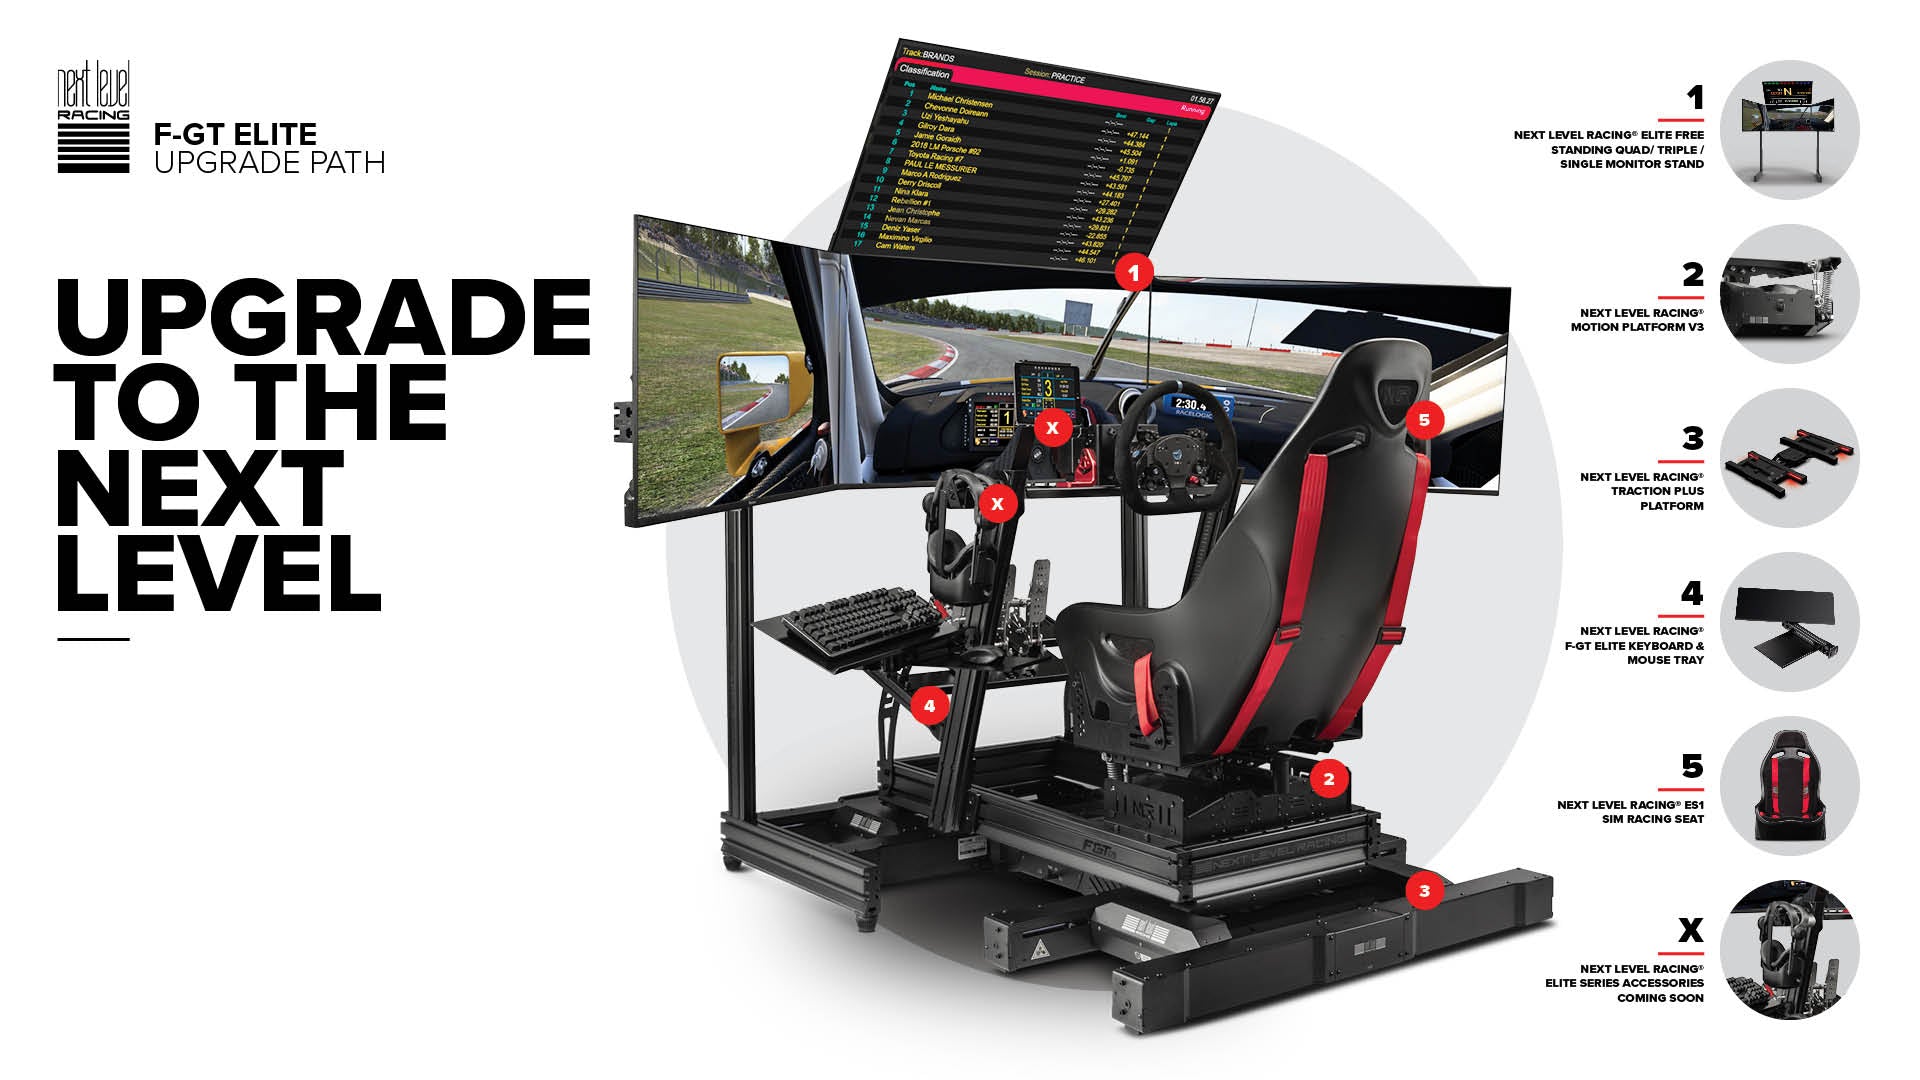 Next Level Racing F-GT Elite iRacing Edition cockpit review: The aluminium  profile king